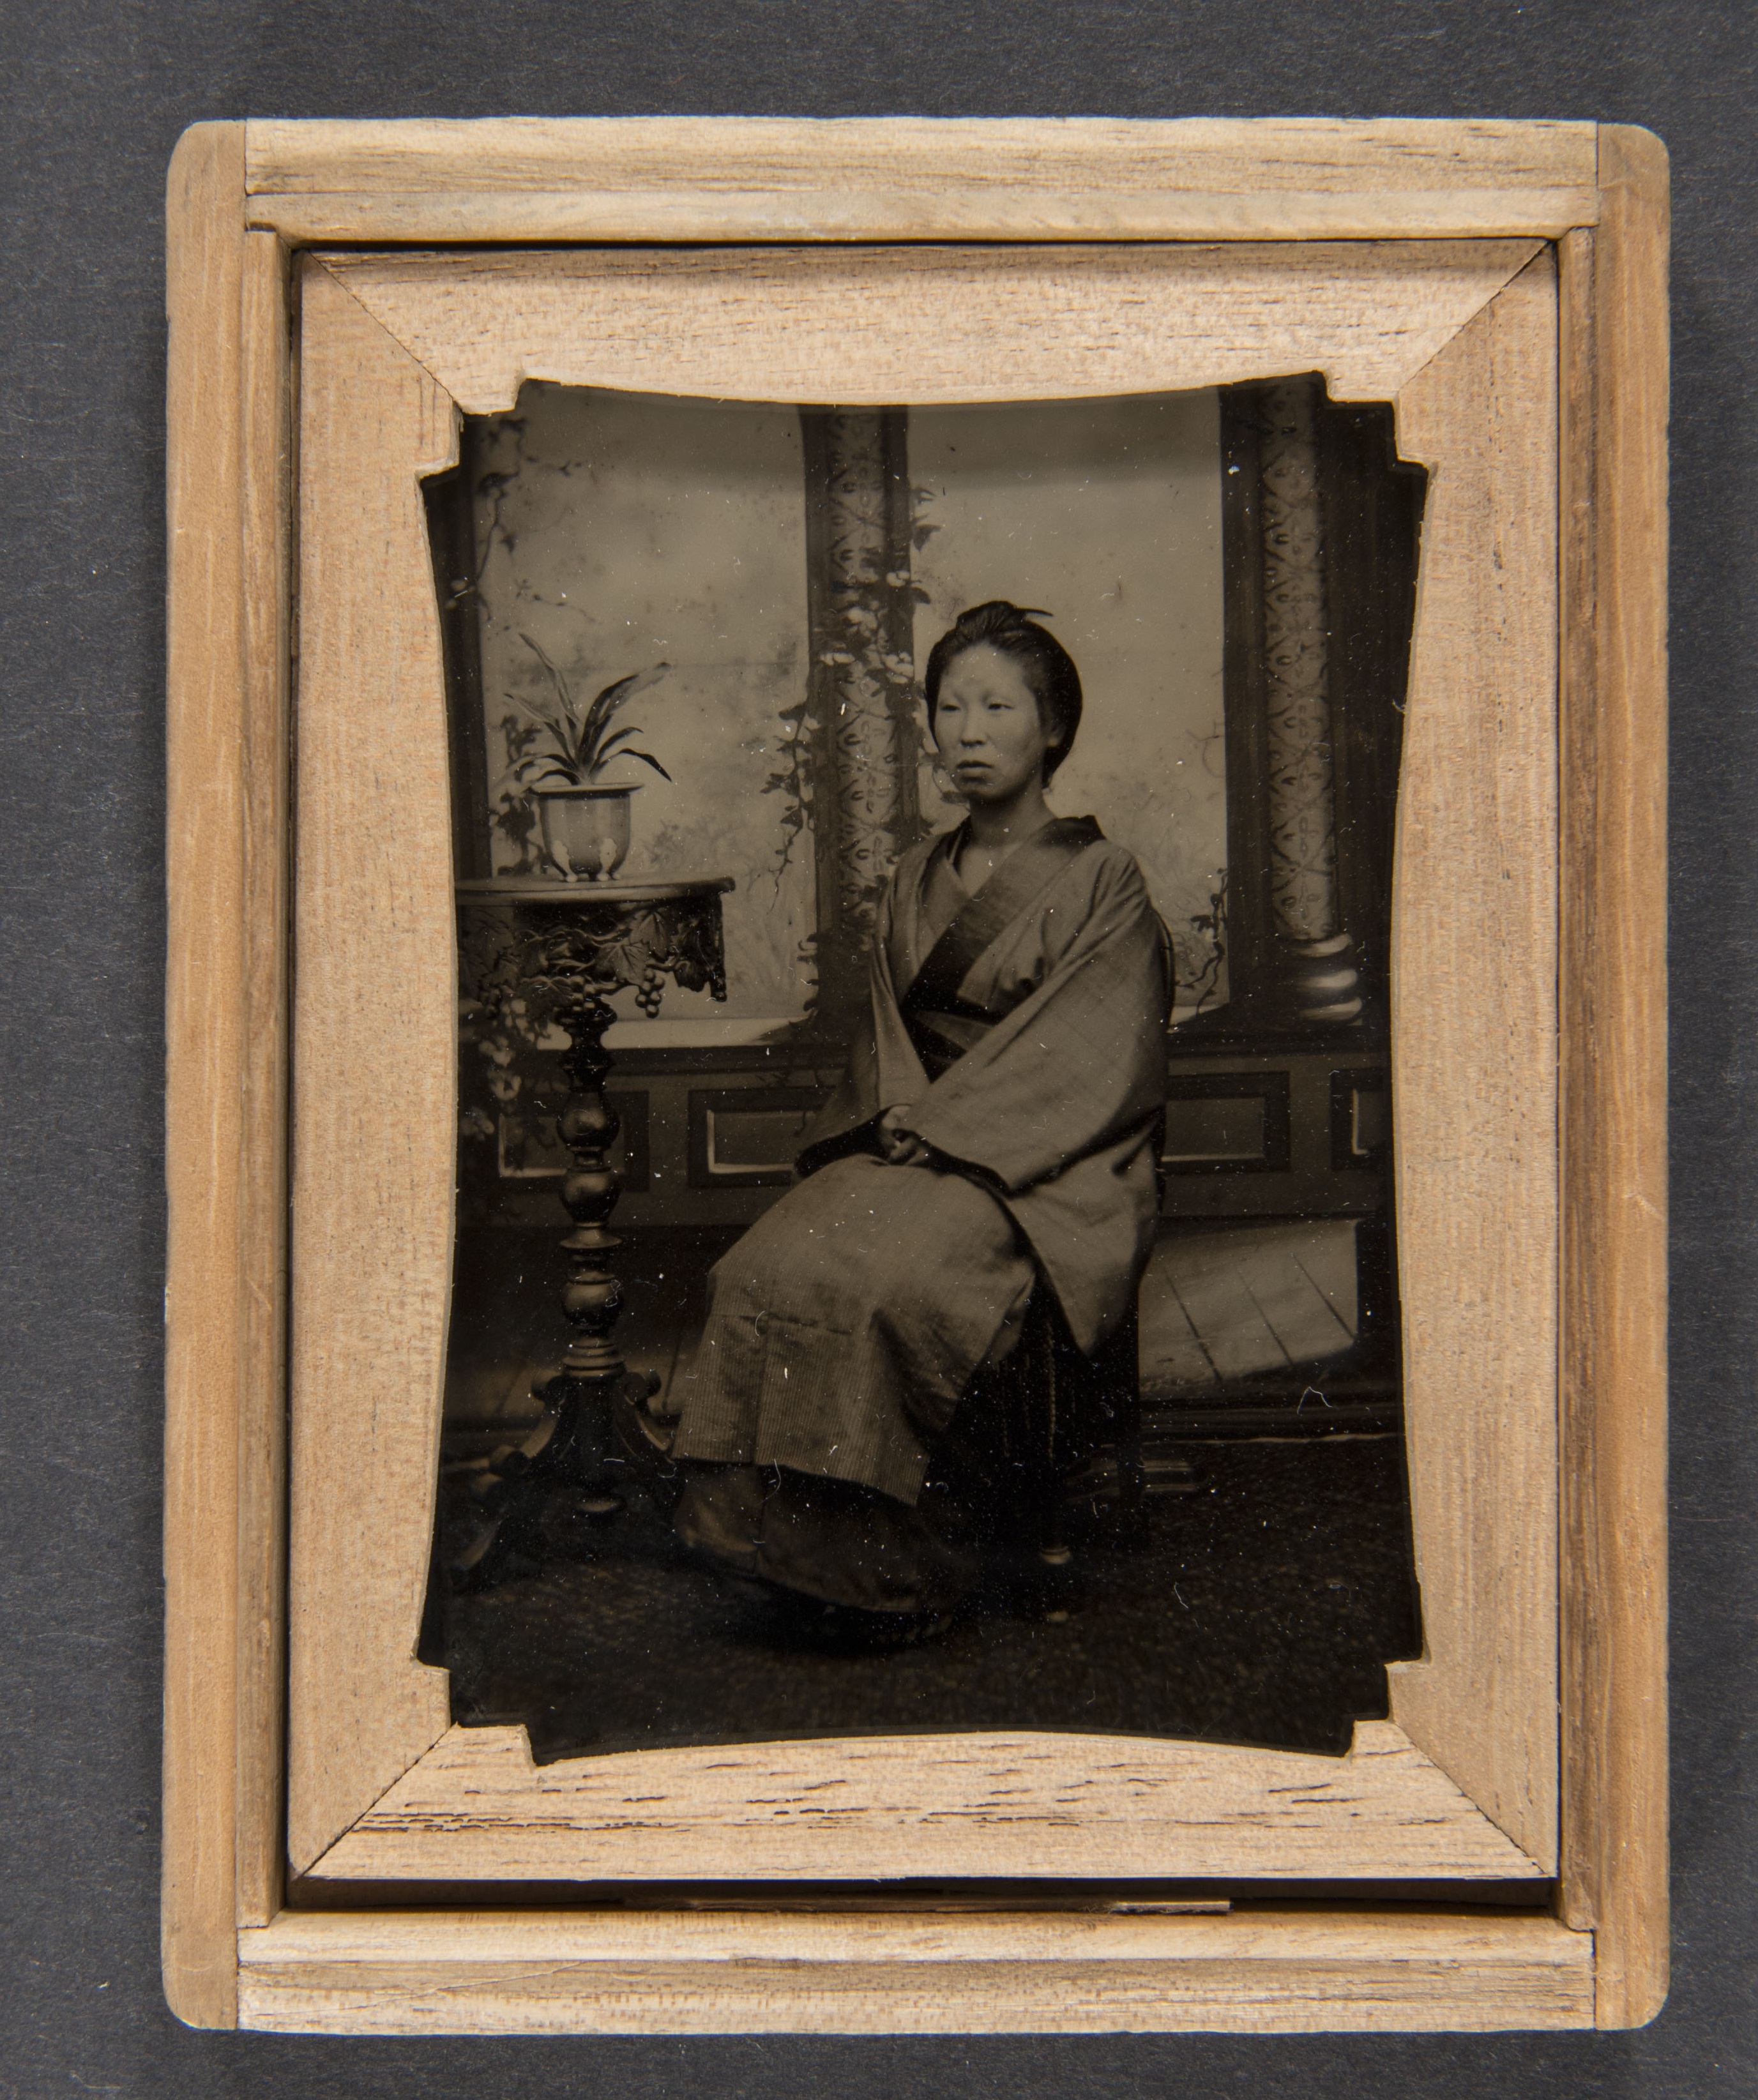 black and white photograph of a Japanese woman in a robe sitting next to an end table with a small plant